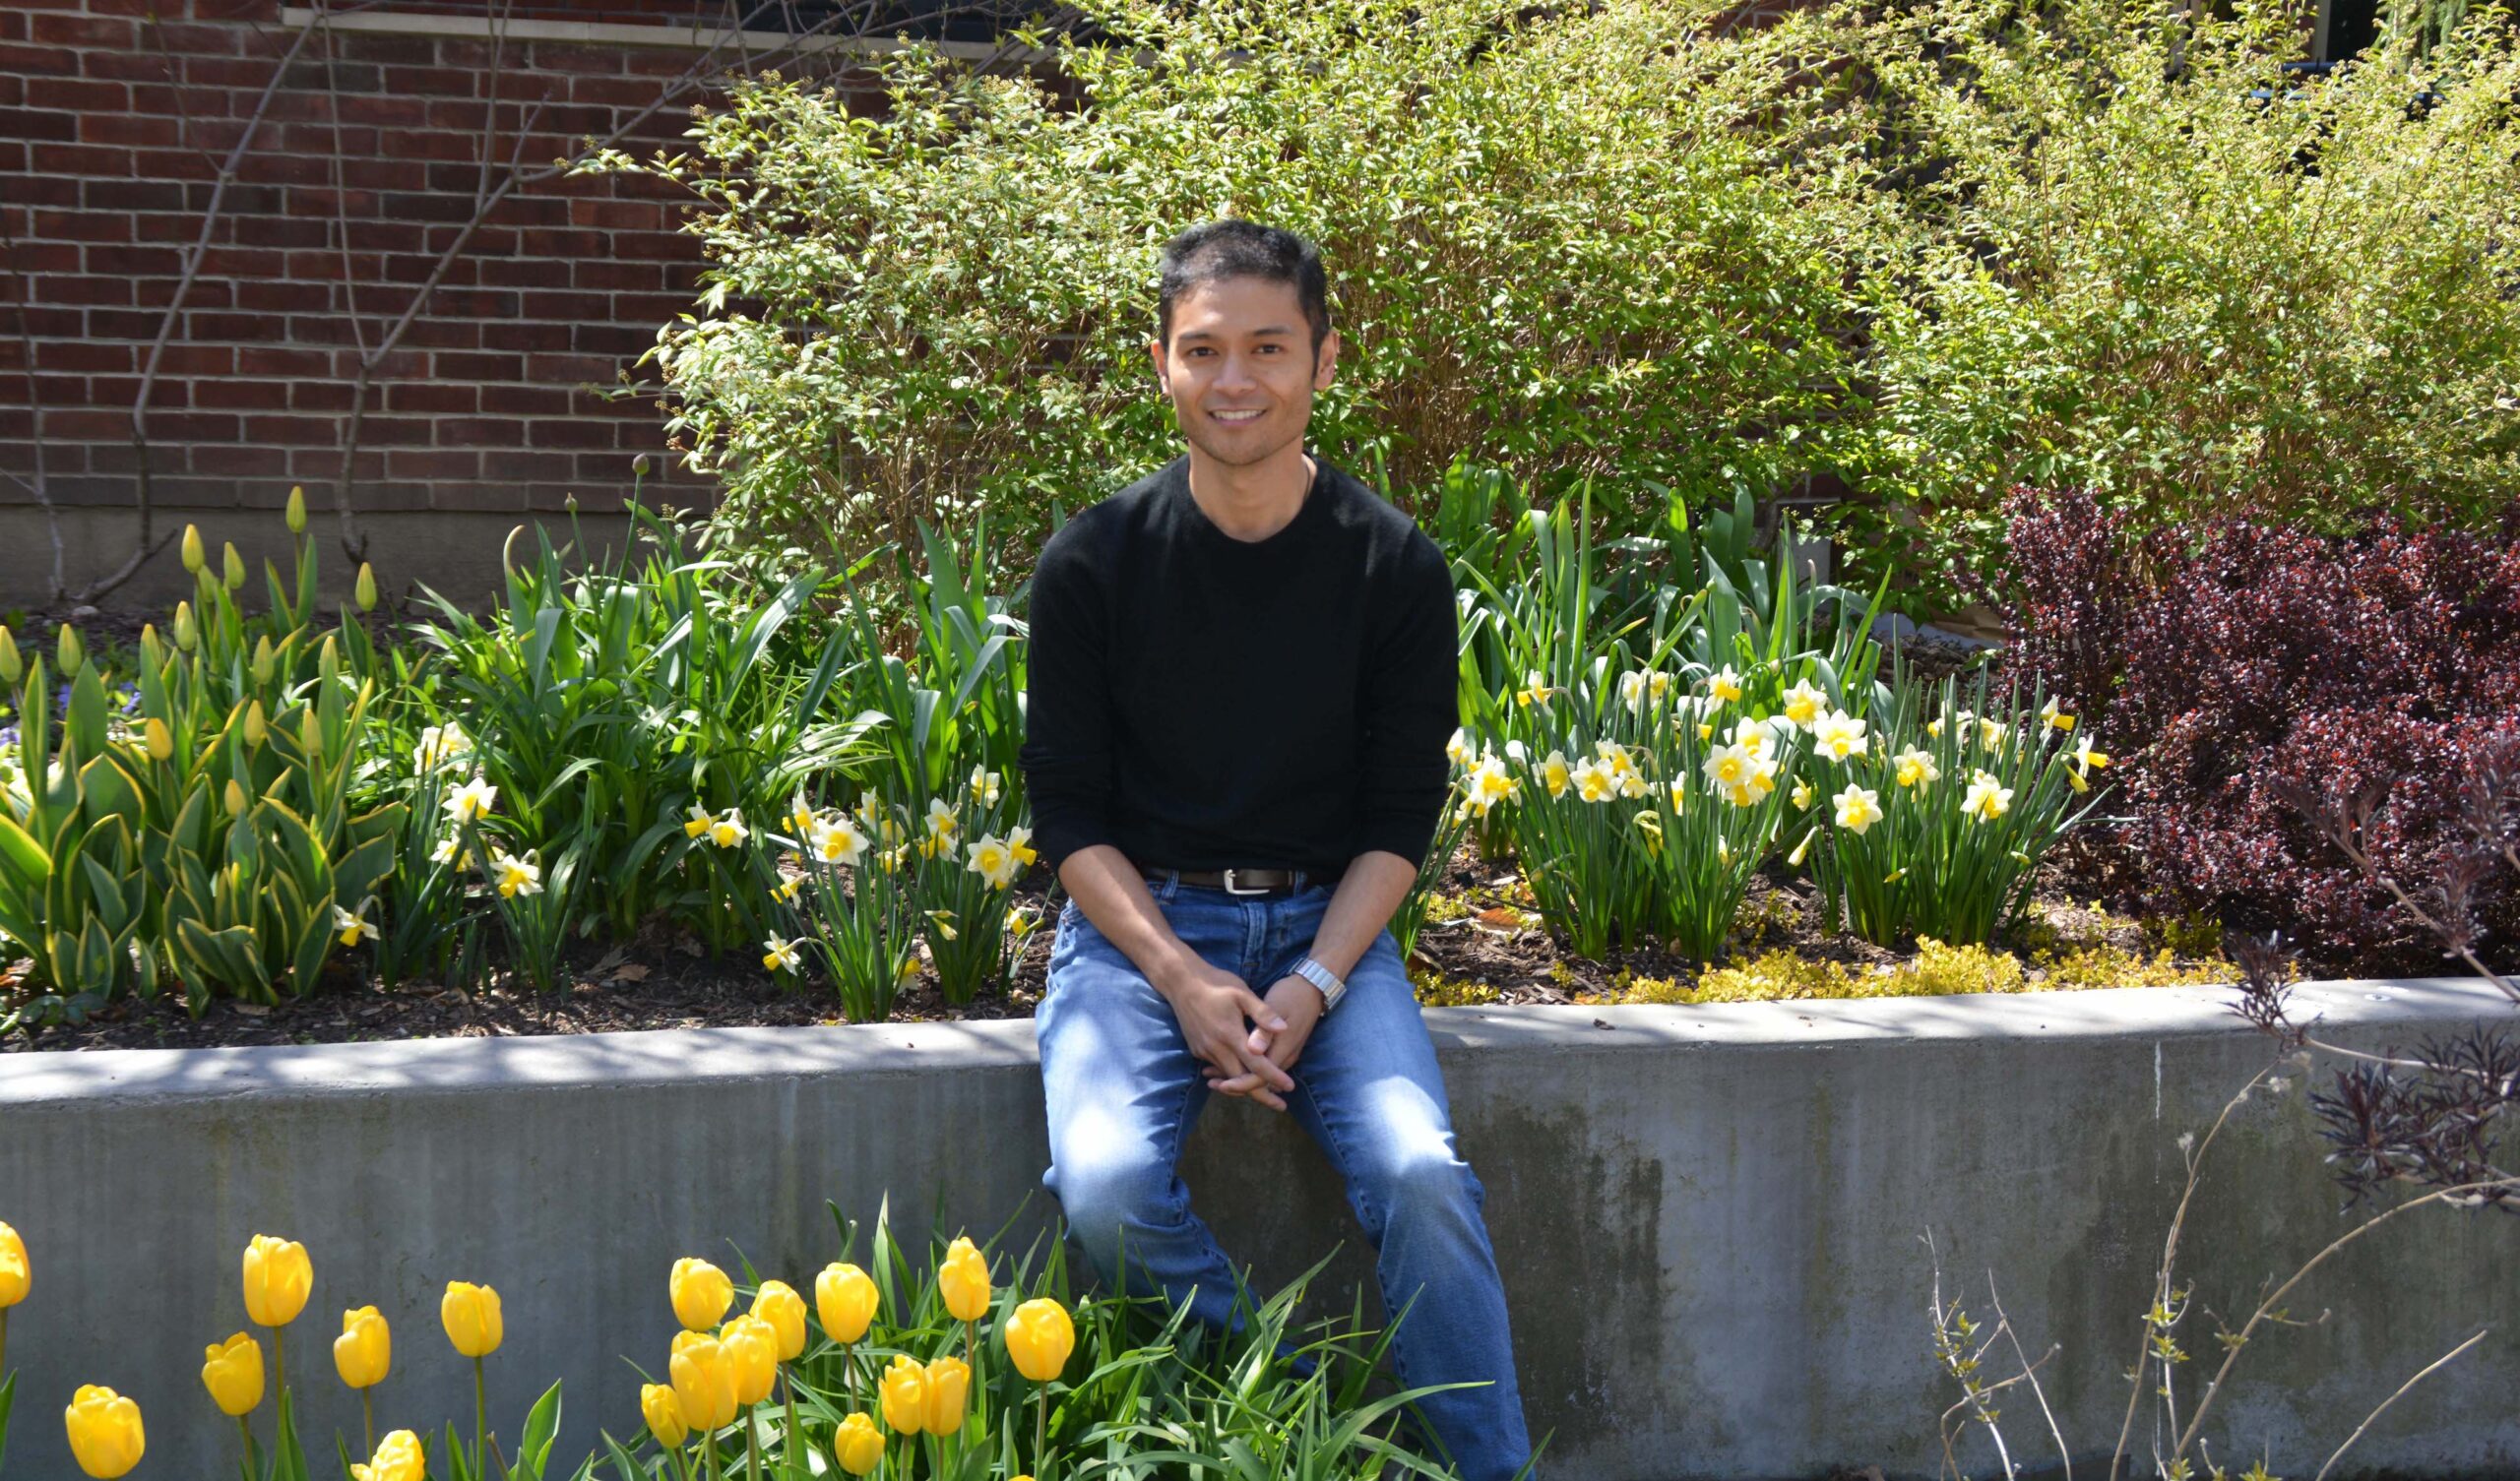 Jeffrey is sitting on a ledge and looking at the camera, smiling. He is wearing jeans and a black shirt. There are flowers/plants behind him and by his feet